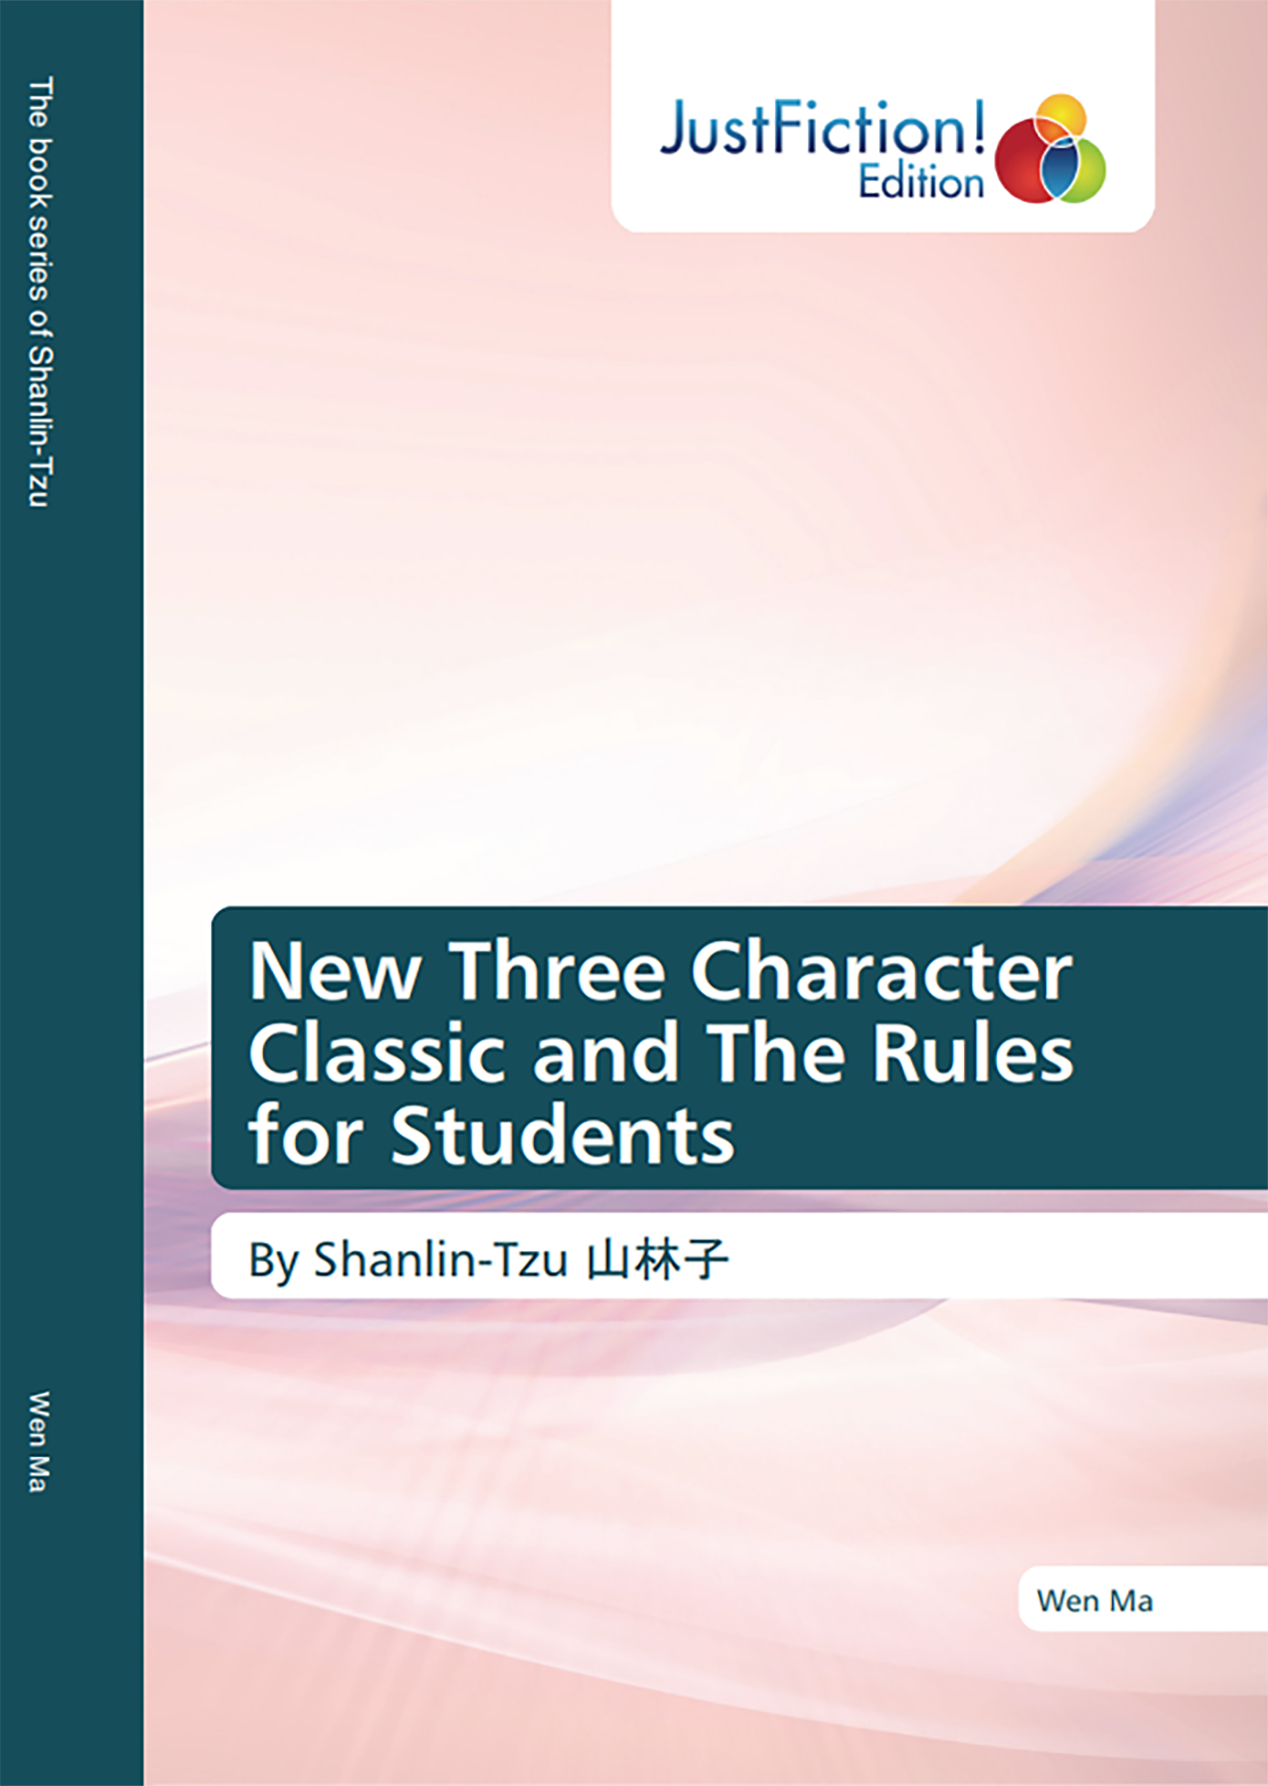 New Three Character Classic and The Rules for Students 新编三字经 弟子规